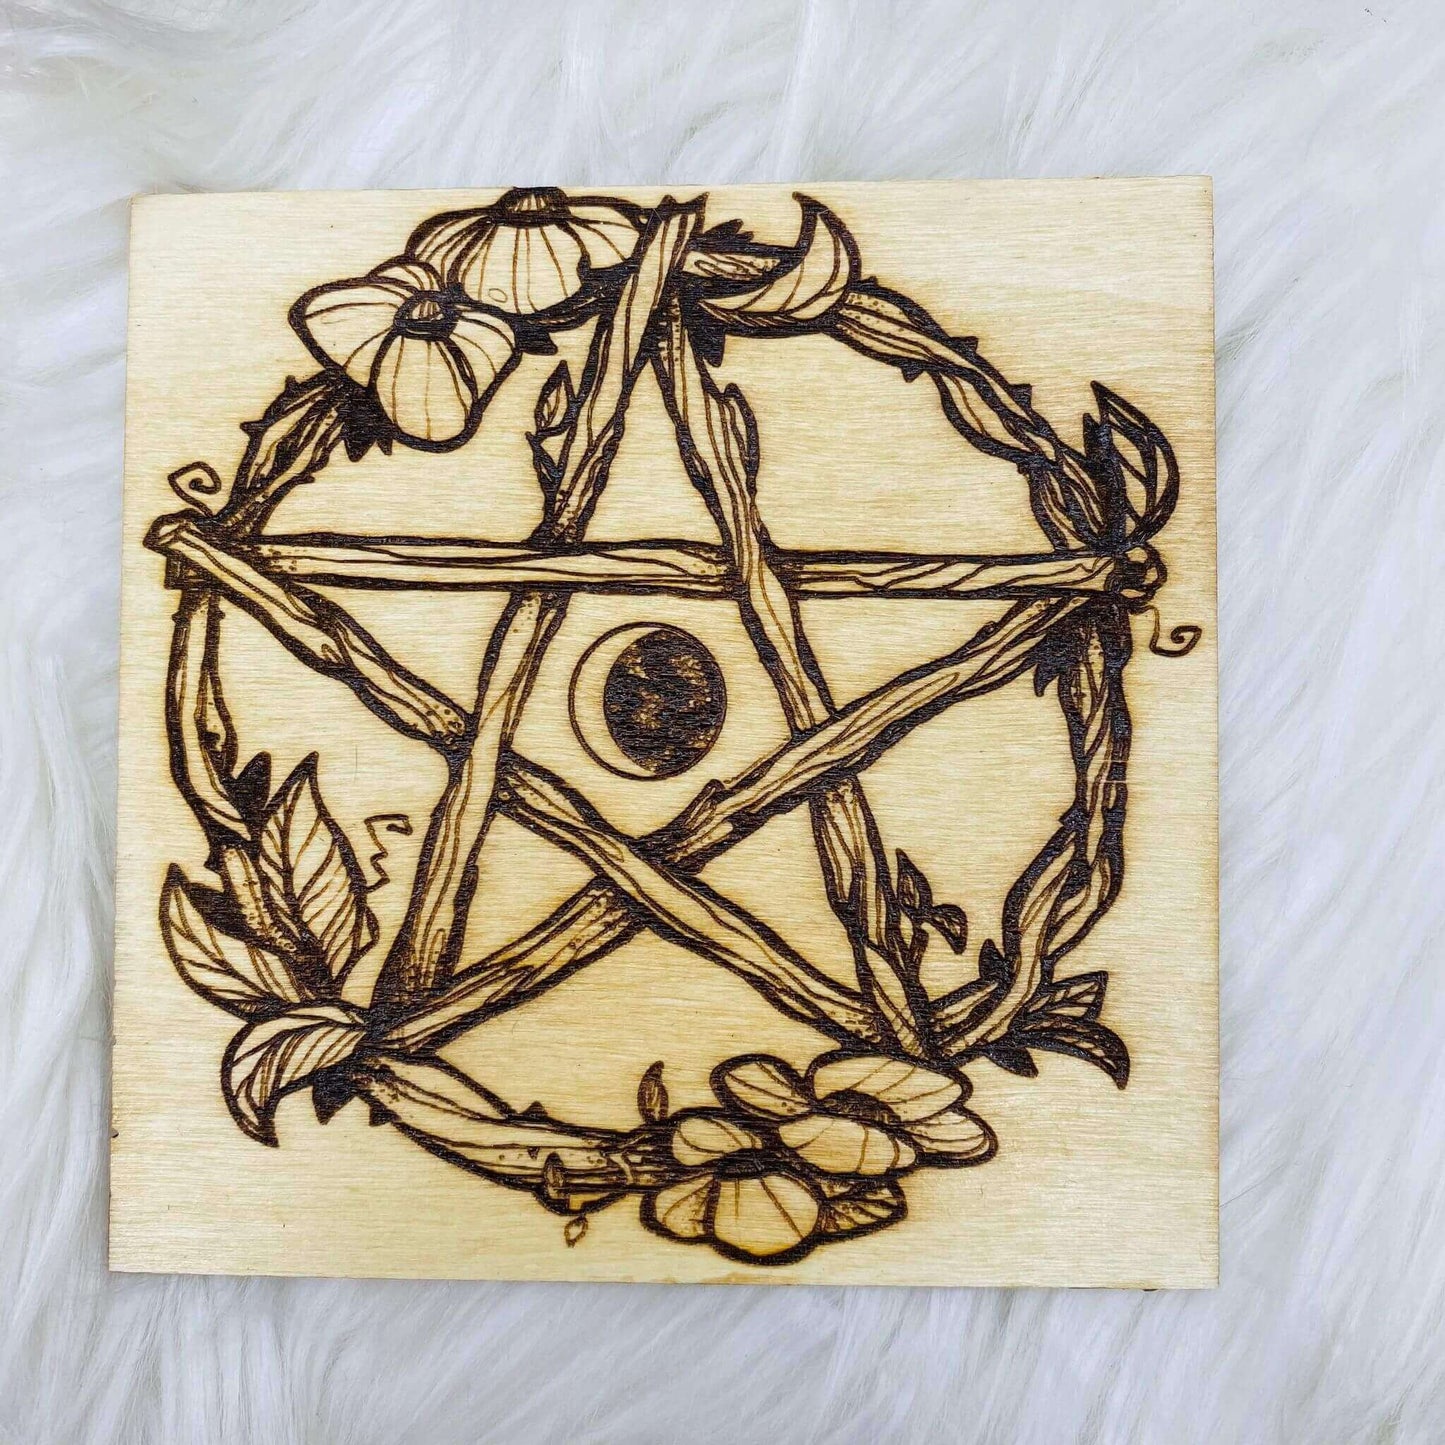 Pentagram with Greenery Altar plaque 4 inch square at $15 only from Spiral Rain